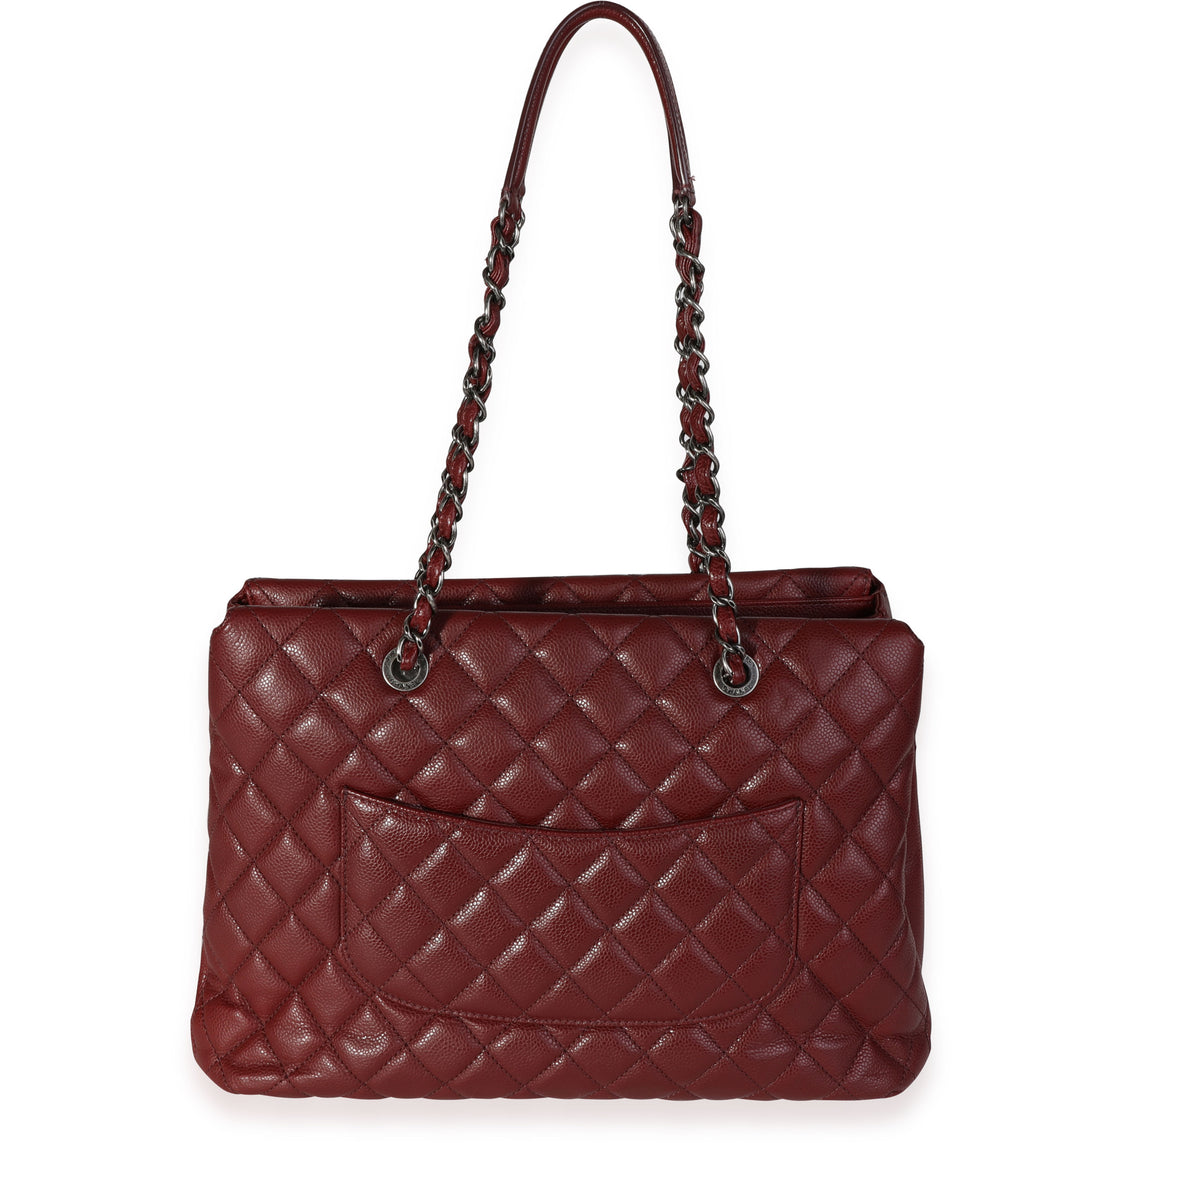 Chanel Dark Red Quilted Caviar City Shopping Tote